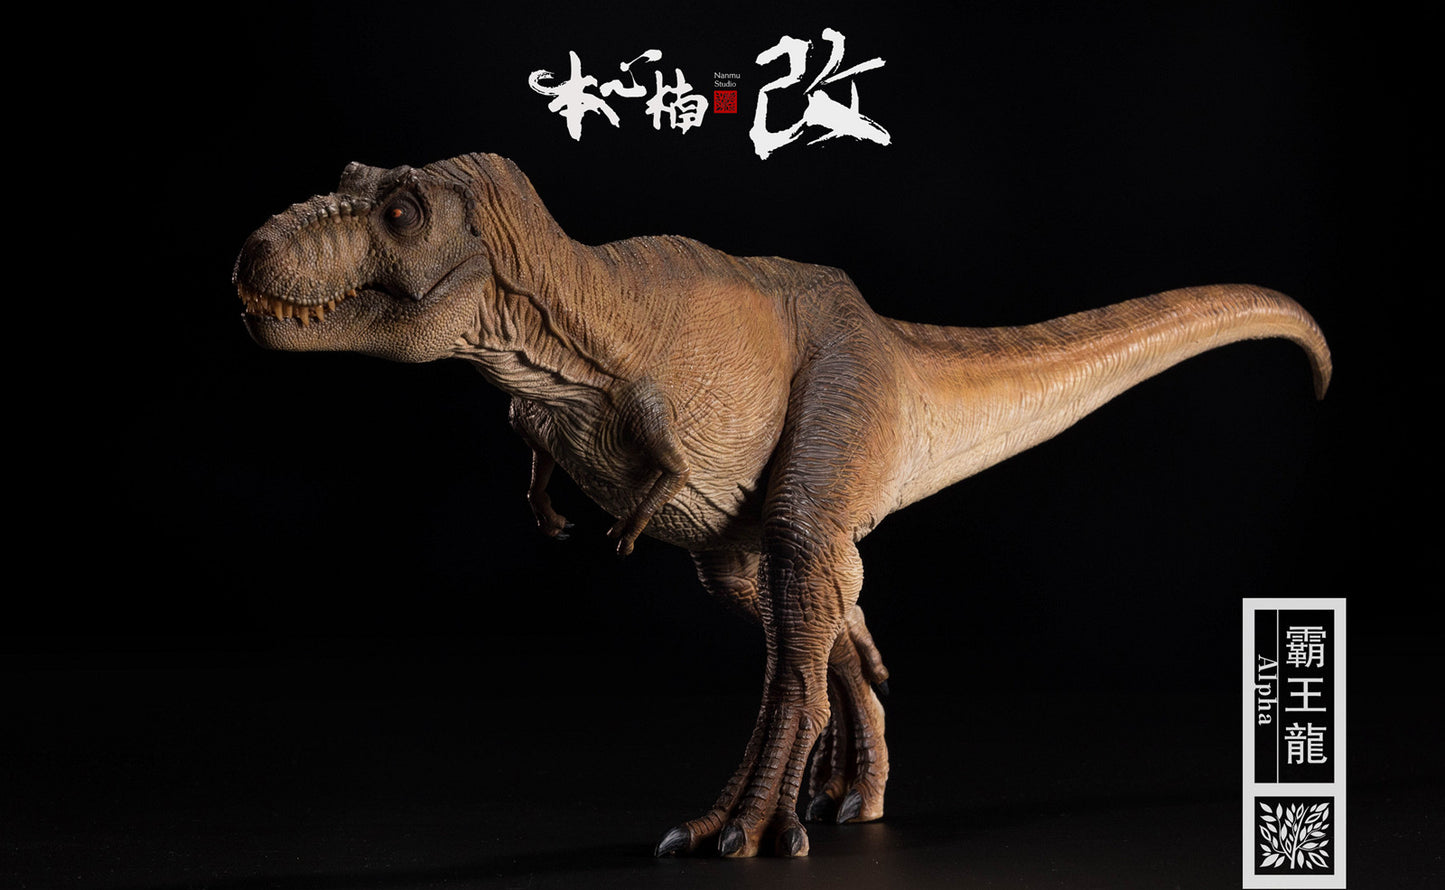 Tyrannosaurus Rex Dinosaurs Movable Jaw 1:35 Models Figure Toy